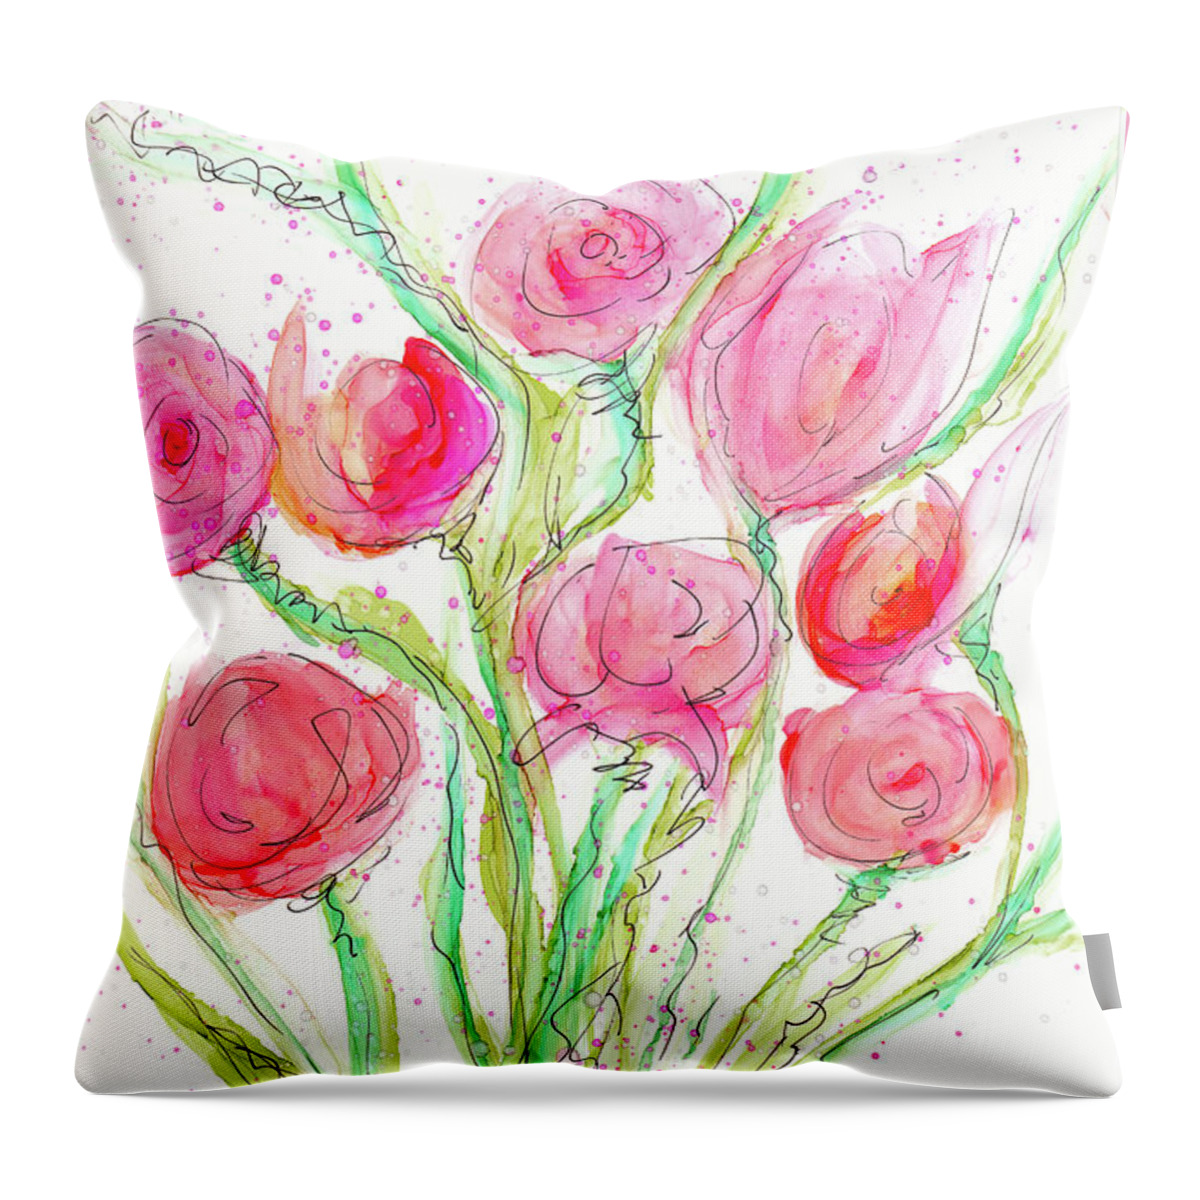 Whimsical Throw Pillow featuring the painting Delight by Kimberly Deene Langlois